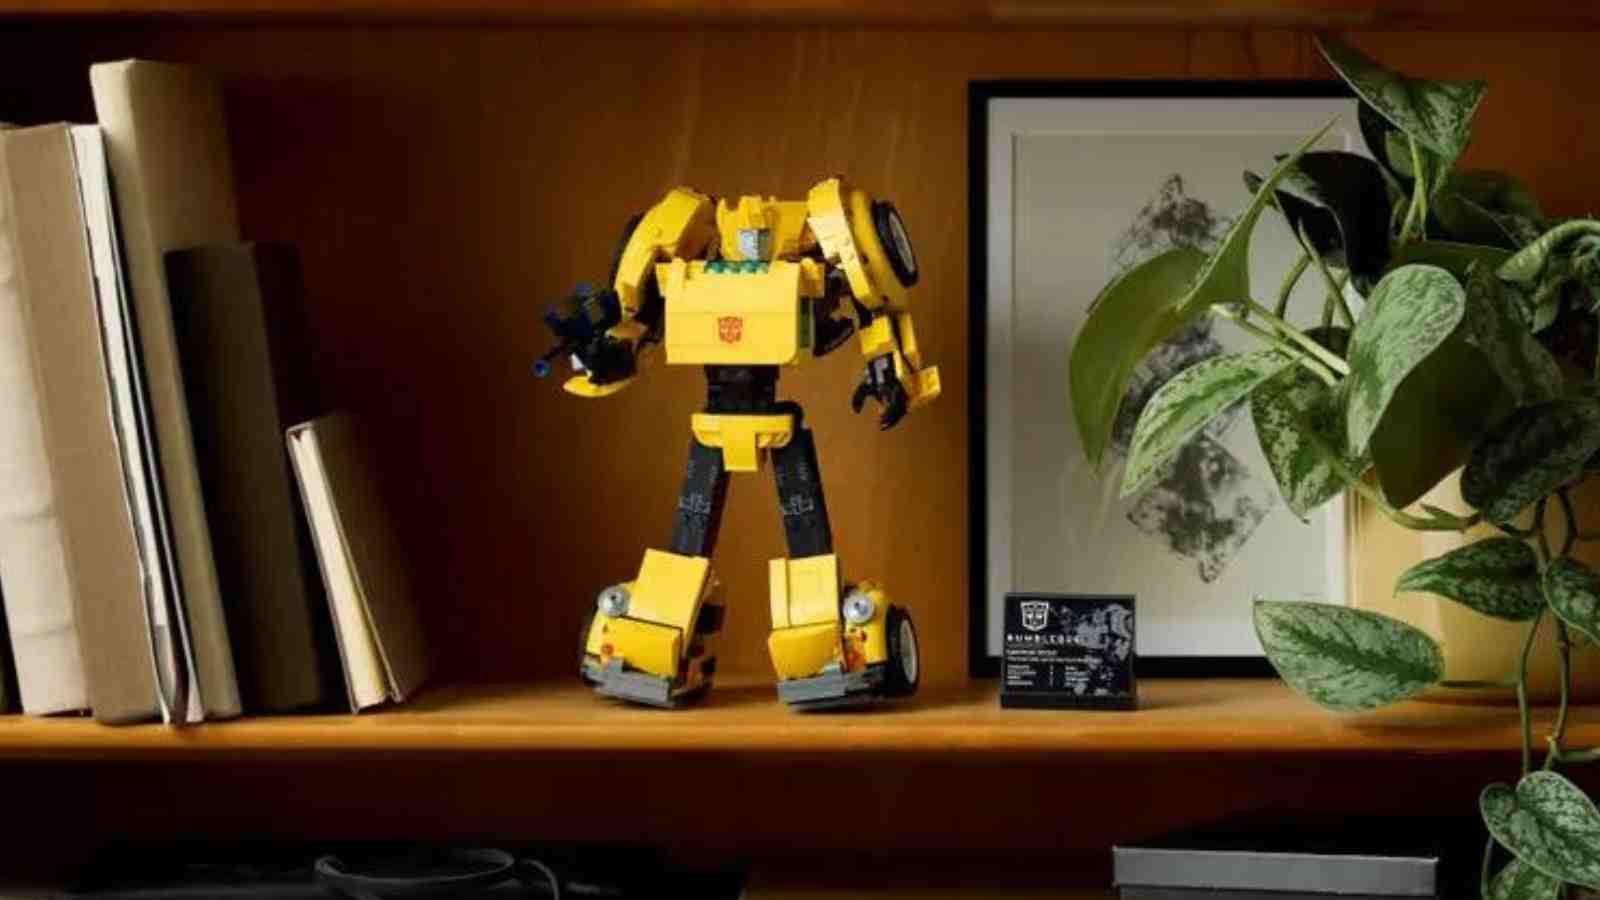 The LEGO Transformers Bumblebee on display in robot mode